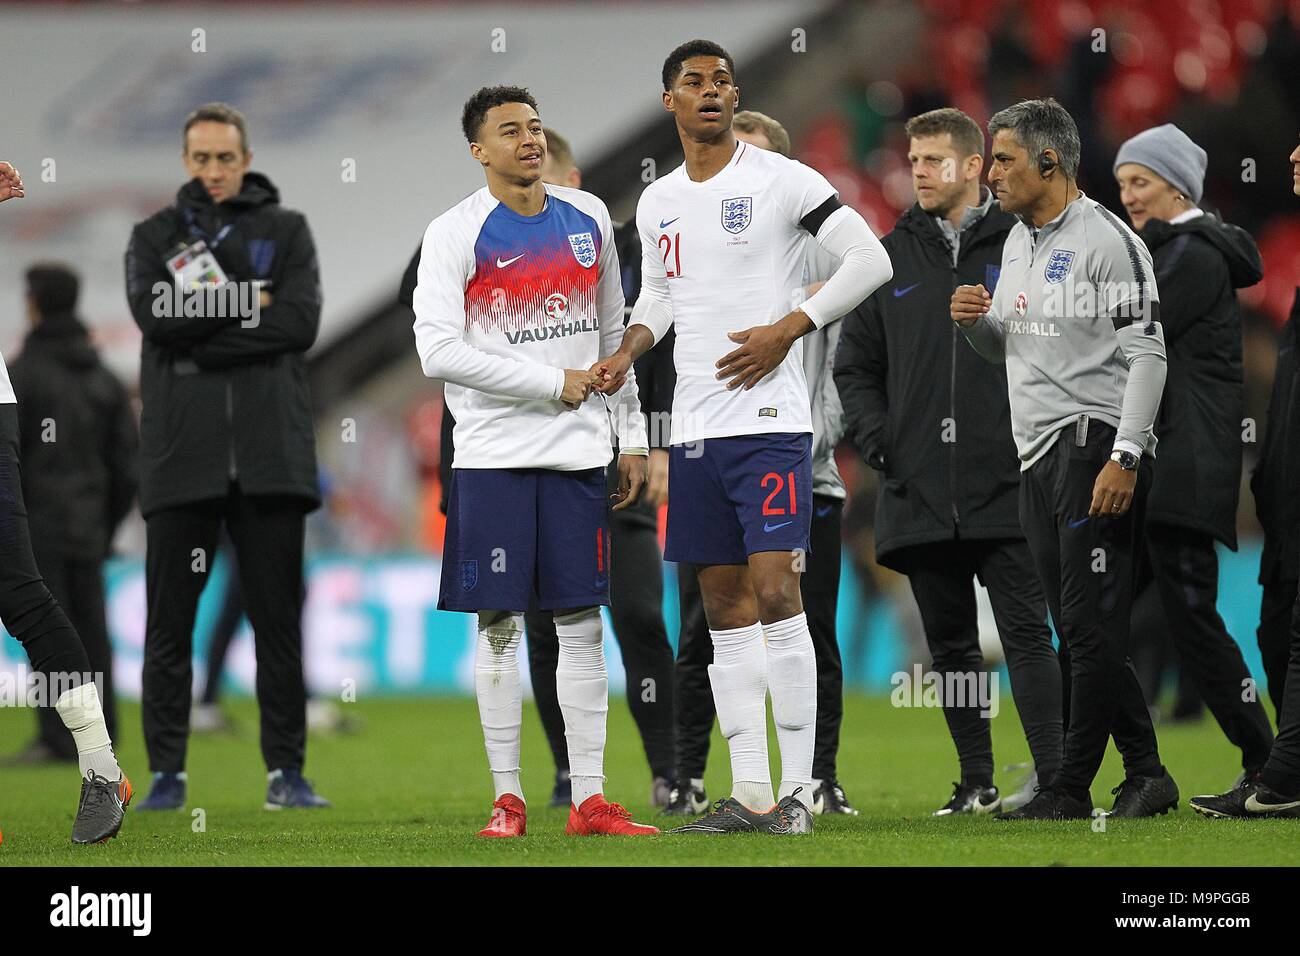 London, UK. 27th March, 2018. Jesse Lingard and Marcus Rashford of England  after the International Friendly match between England and Italy at Wembley  Stadium on March 27th 2018 in London, England. (Photo